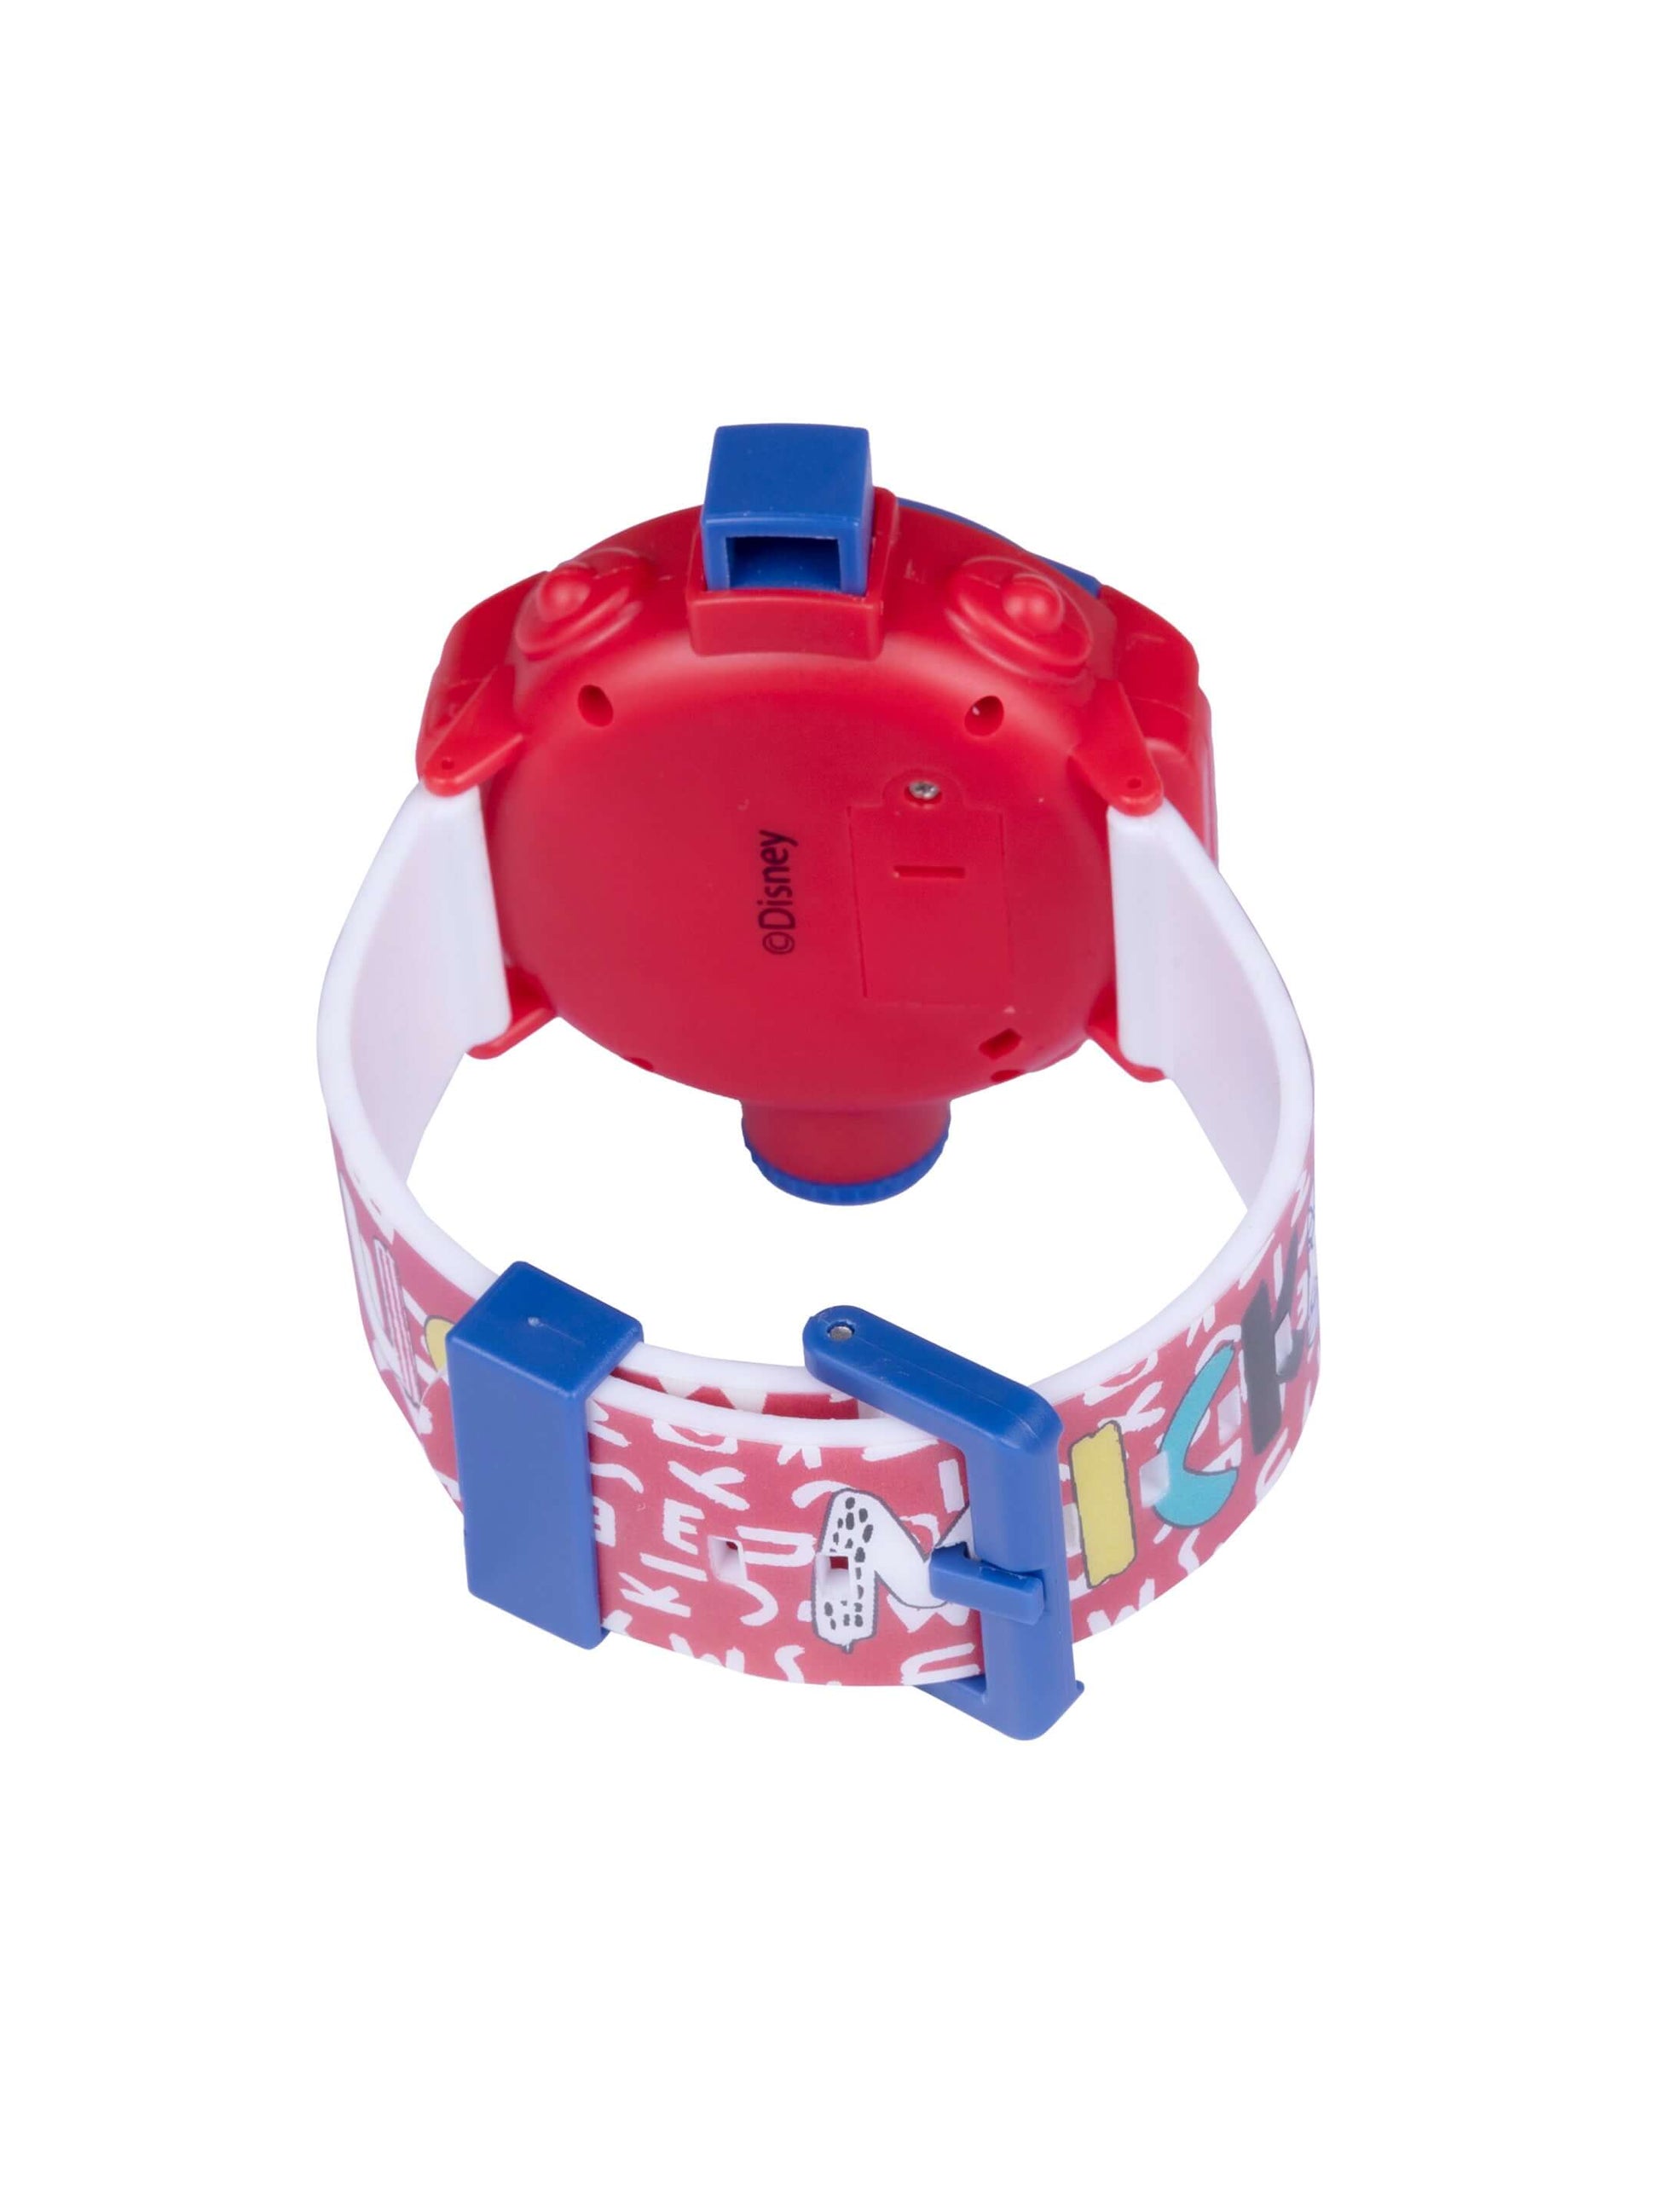 Disney Boys Mickey Projector Watch-4 Years to 15 Years - Toys4All.in